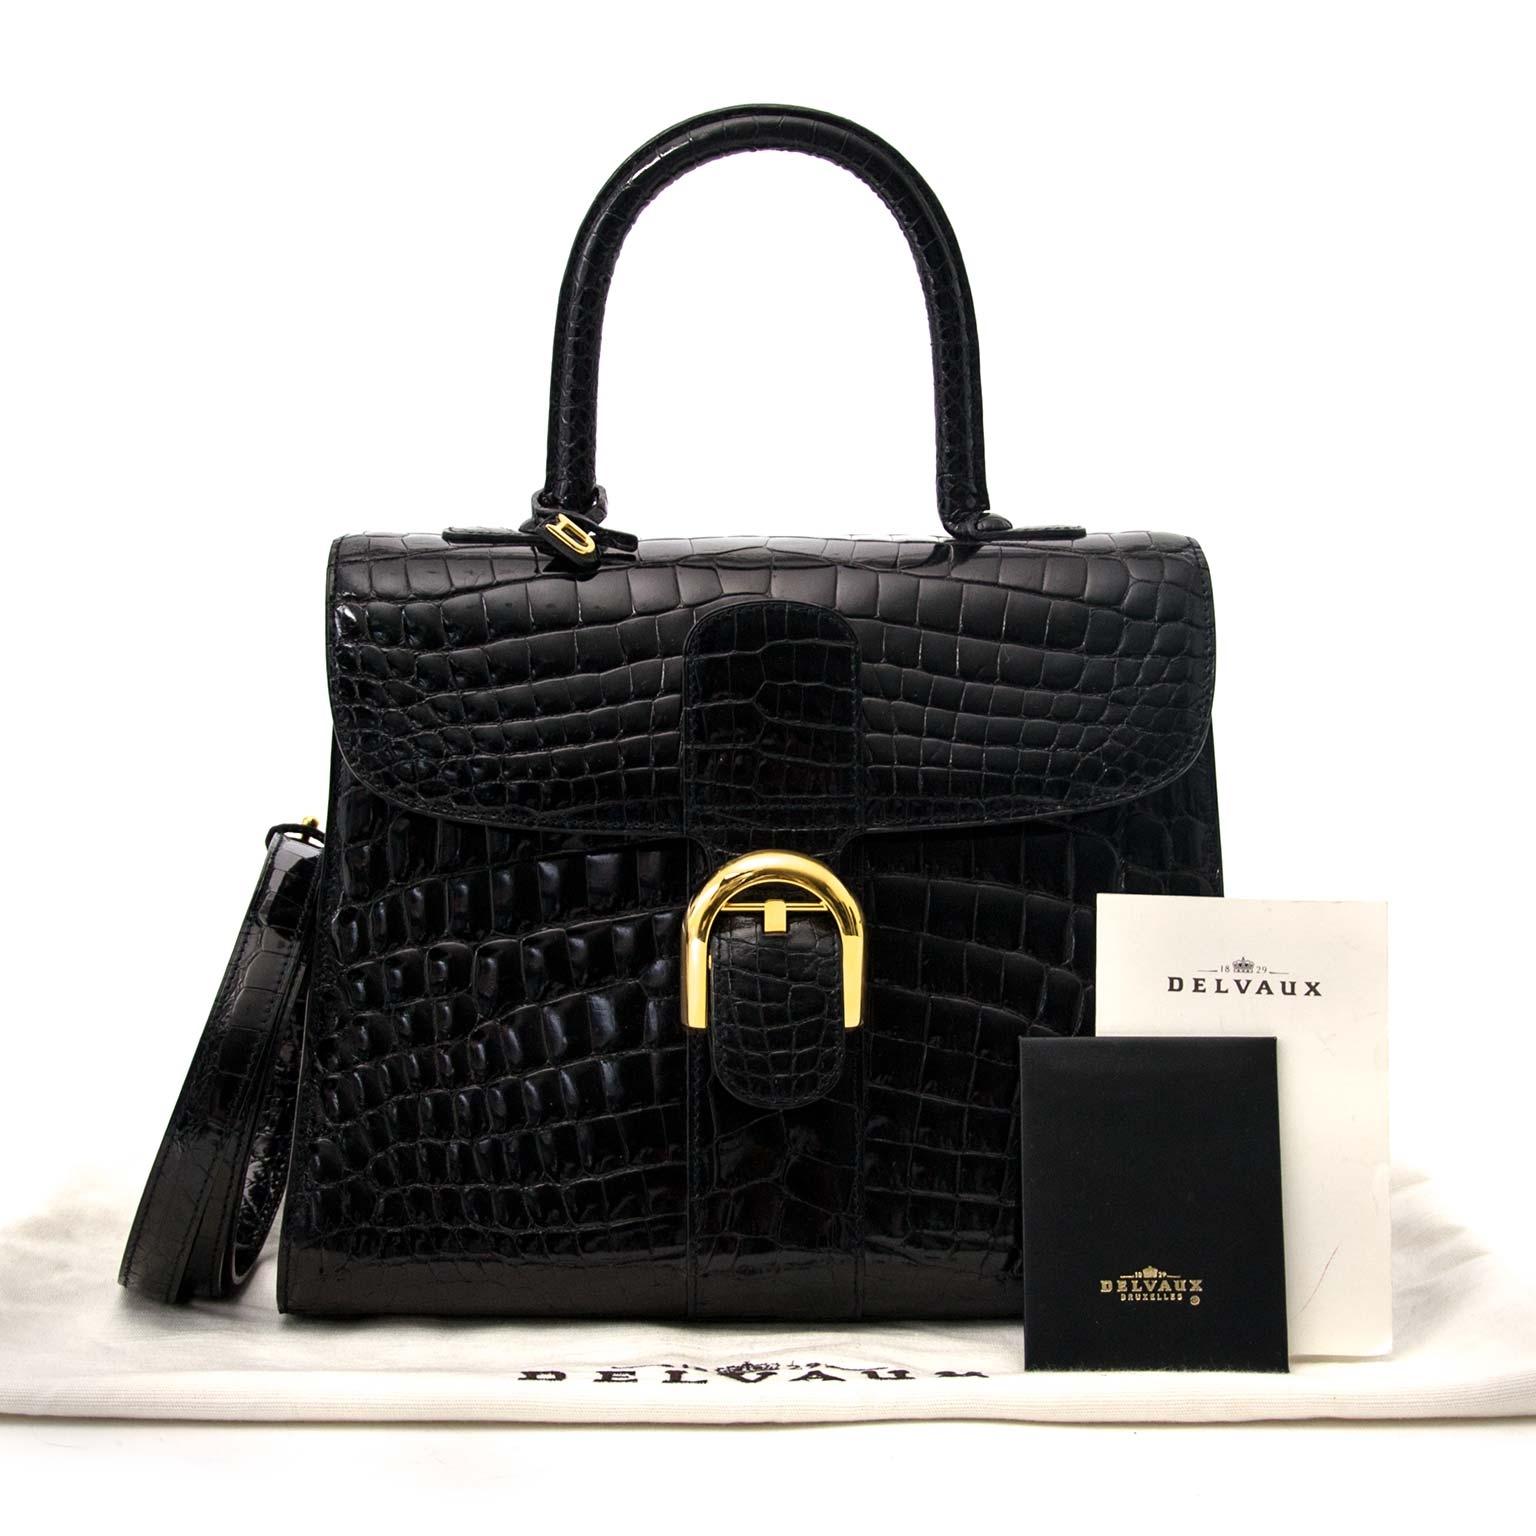 As new, only worn a few times

Delvaux Brillant MM Crocodile black with golden hardware + strap

Est. retail Price : € 24.000

The most iconic bag of Delvaux's design, the Brillant requires exceptional craftsmanship and skill.

Made out of no fewer